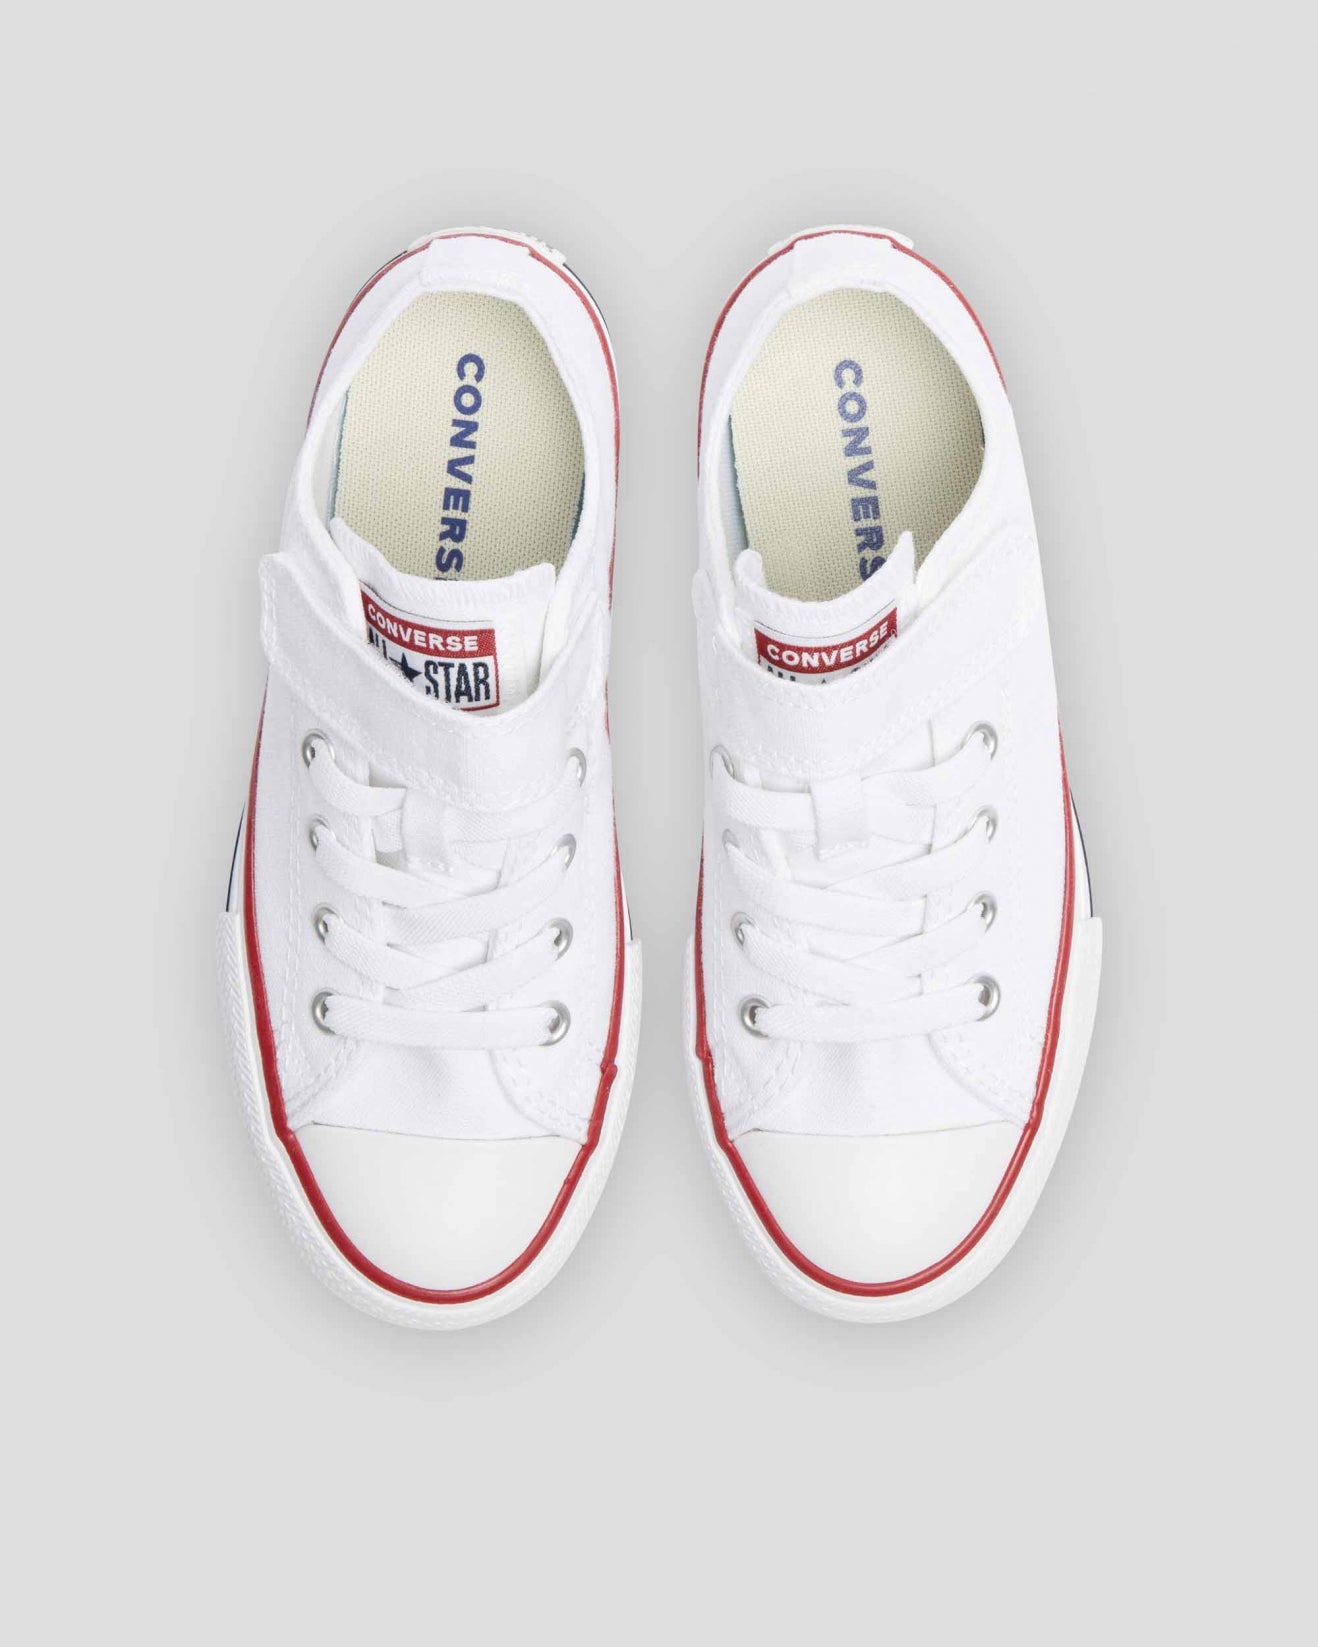 + Converse Chuck Taylor All Star Easy On 1V Junior Low Top White / Elastic Laces - (372882) - VCW - R1L1